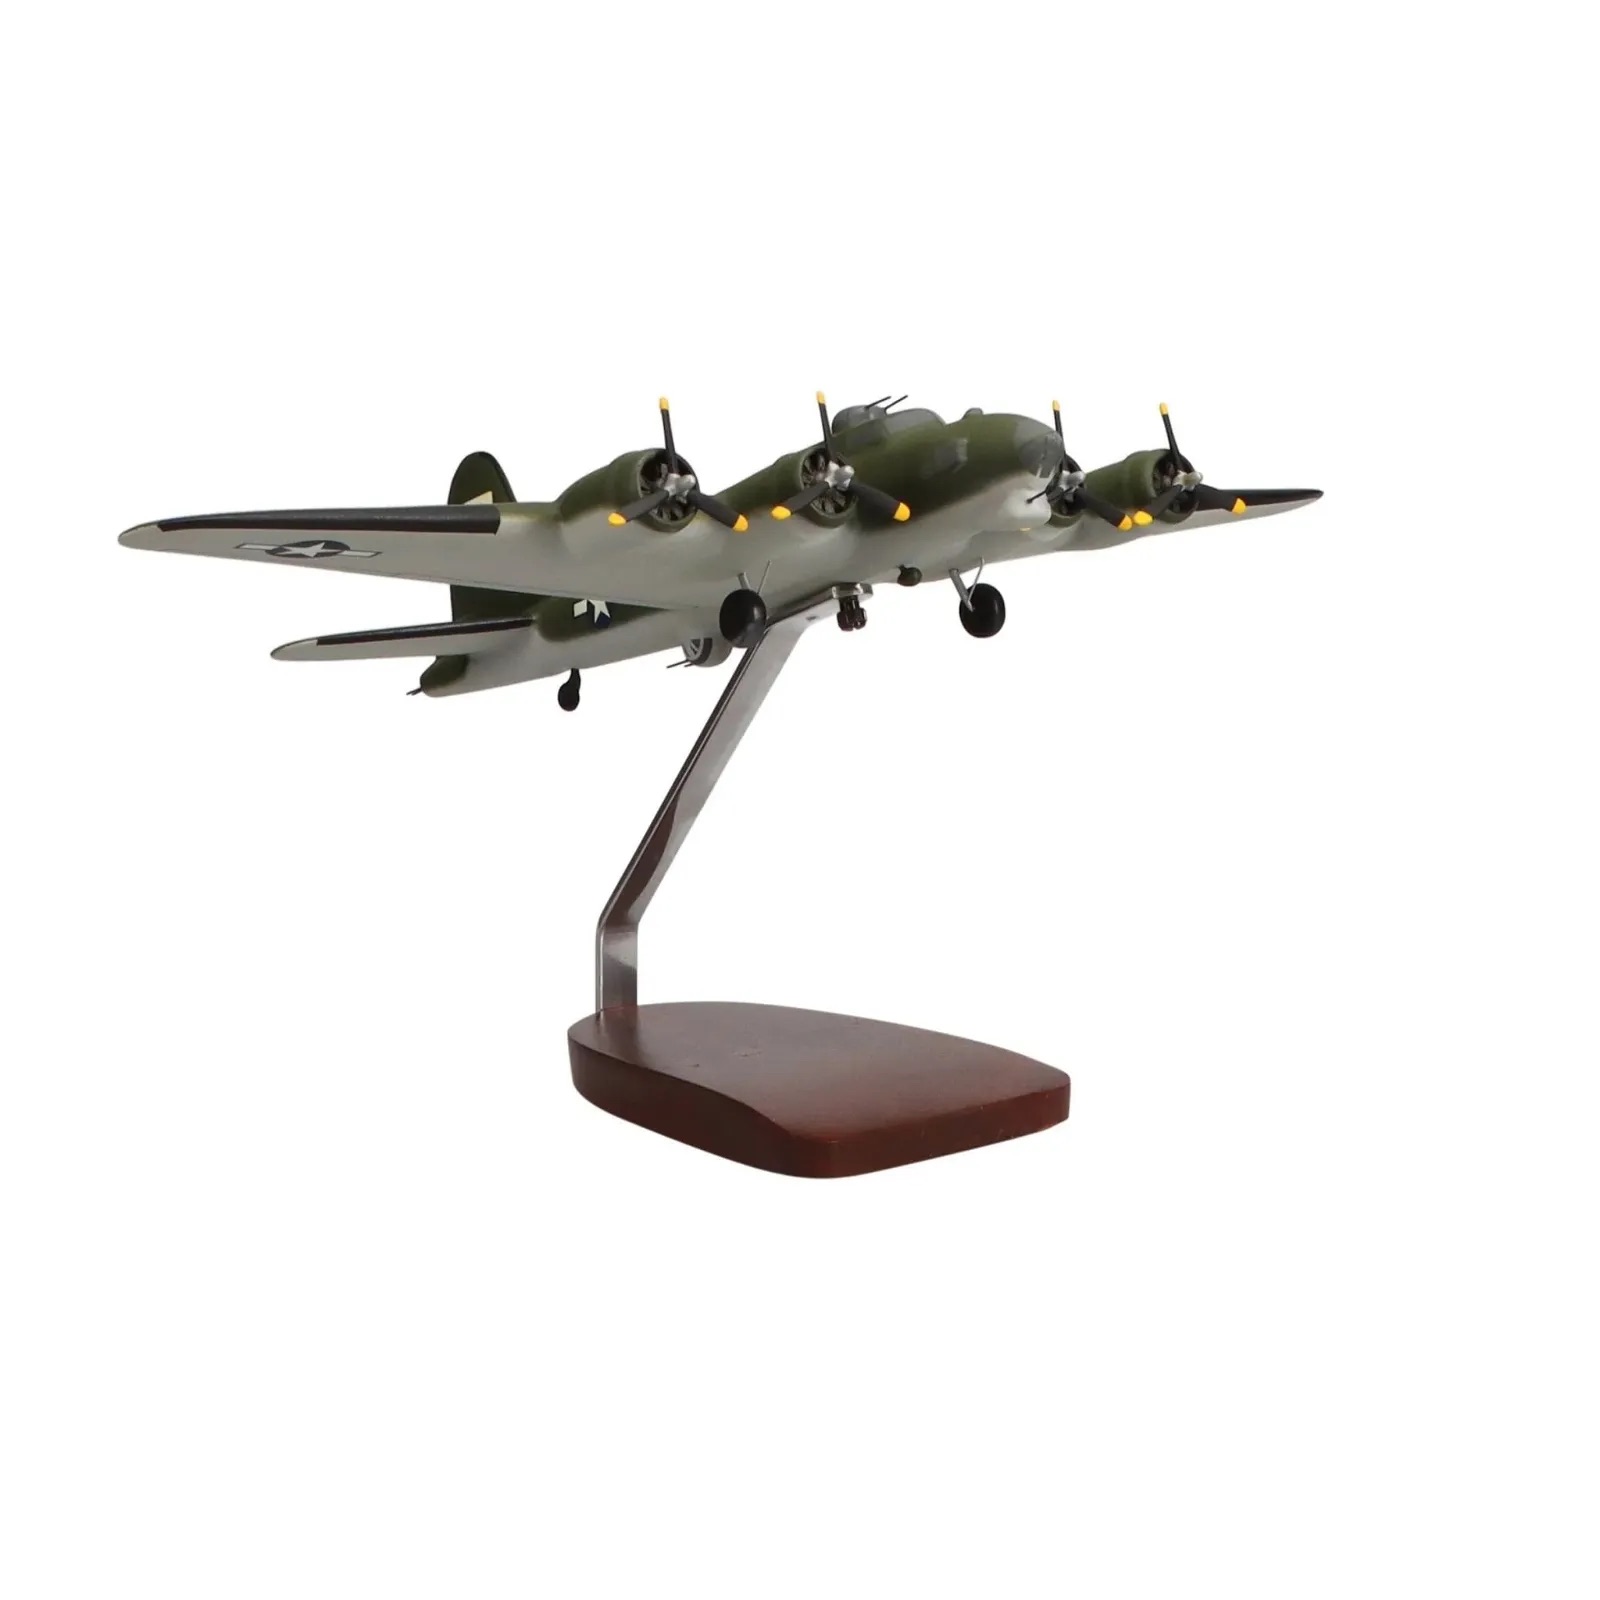 Boeing B17 Flying Fortress Scale Model - Image 4 of 4